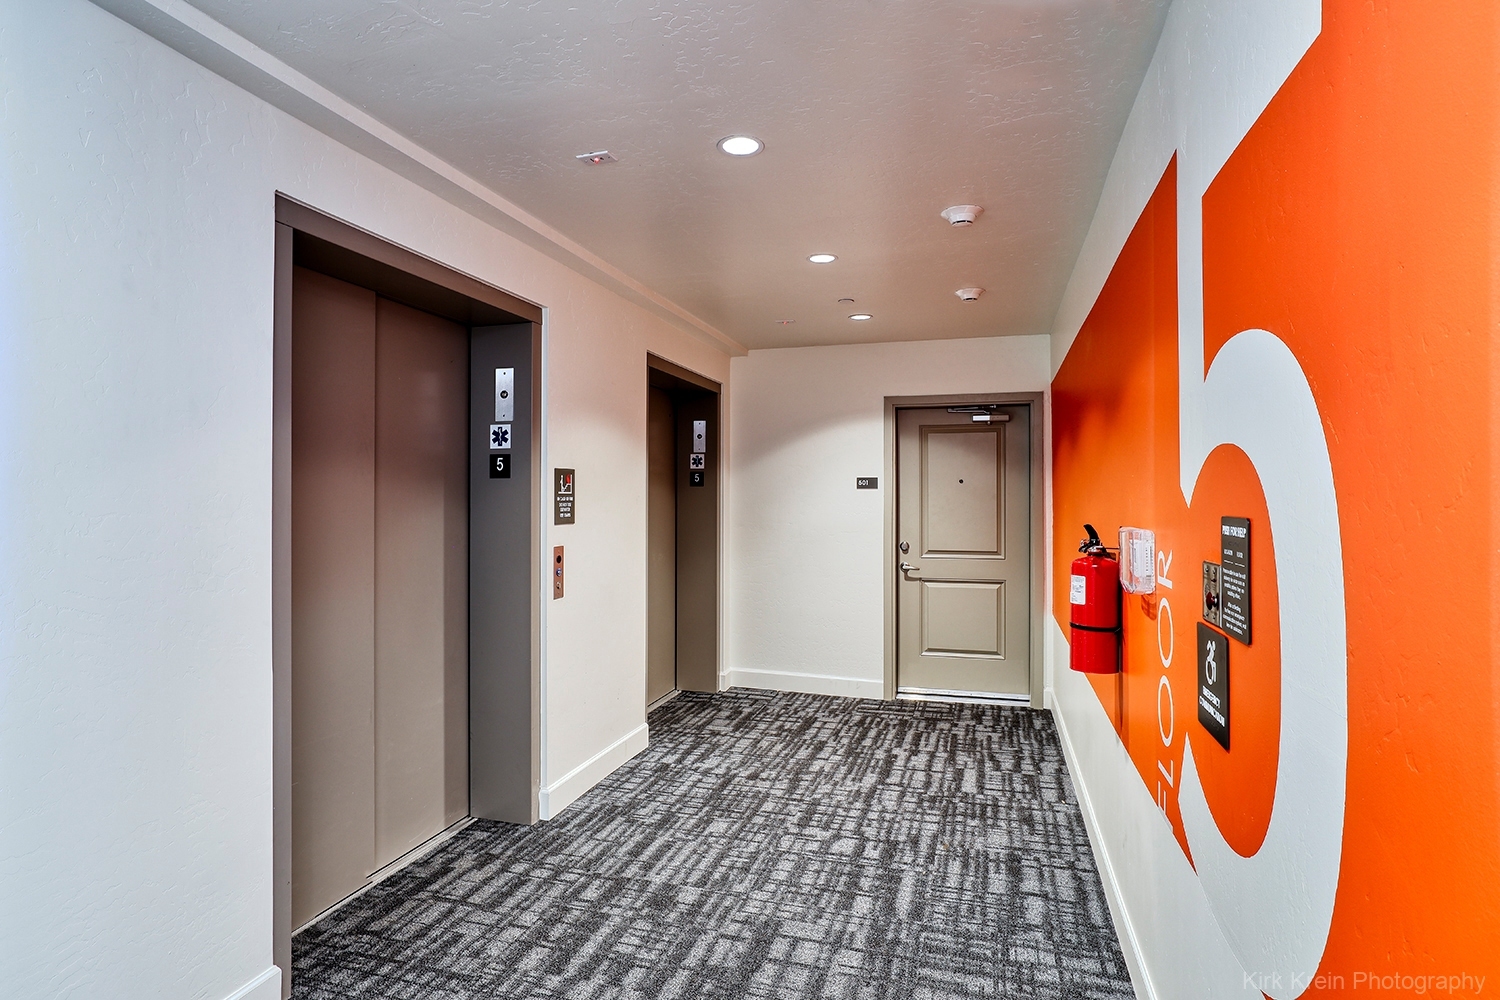 Builder-Contractor-Elevator-Photo-By-Kirk-Kreiin-Photography-Phoenix-AZ Architectural and Commercial Real Estate Photography by Kirk Krein, Phoenix Metro,  AZ - East Valley and Beyond!